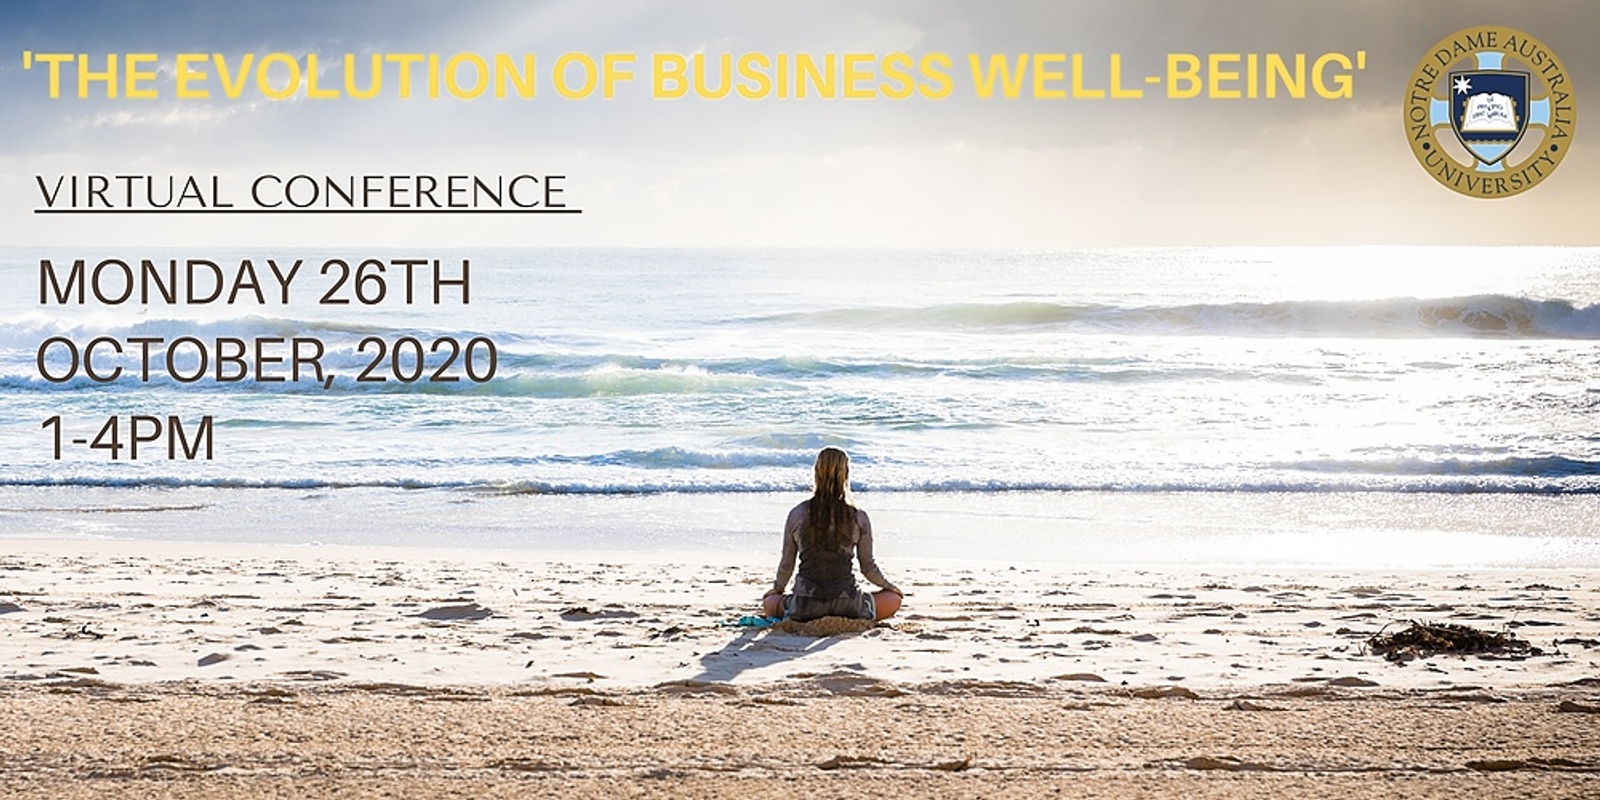 Banner image for The Evolution of Business  ‘Well-Being’ -  for a Better World 2050